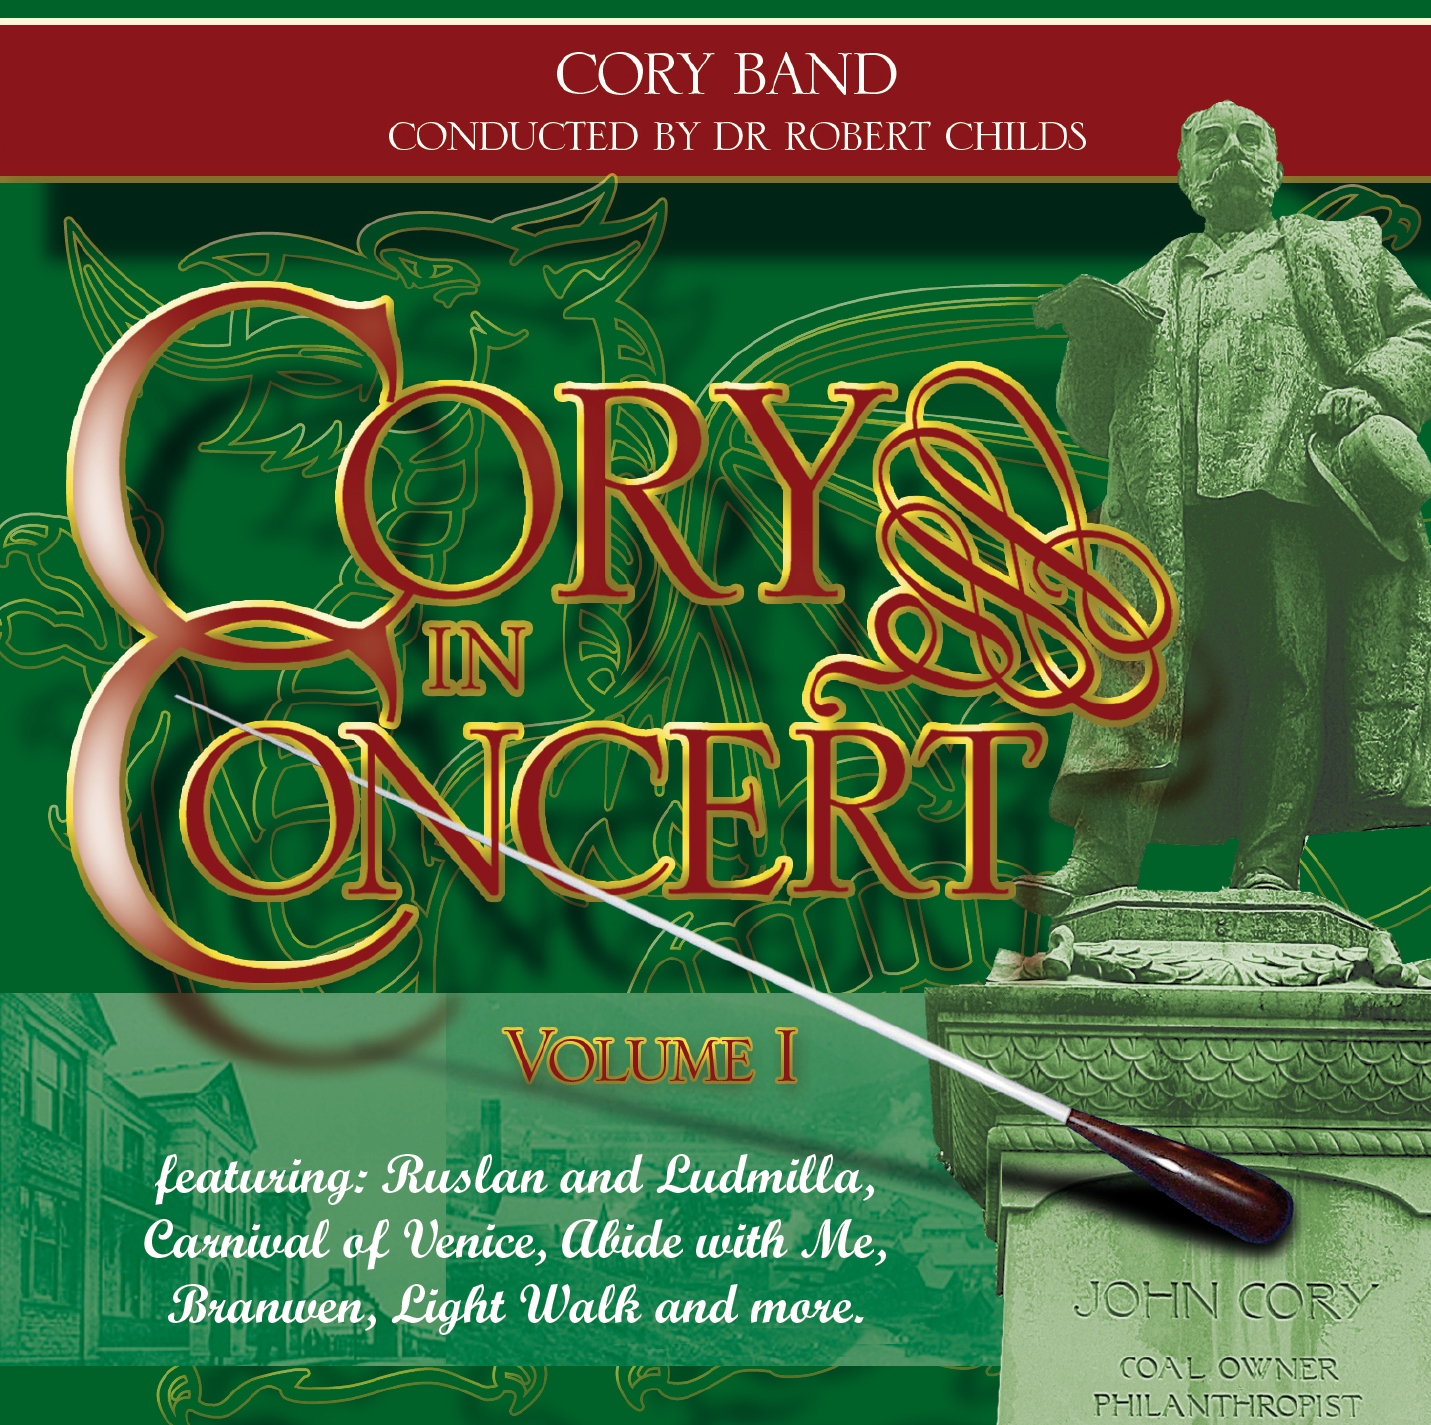 Cory in Concert Vol. I - Download